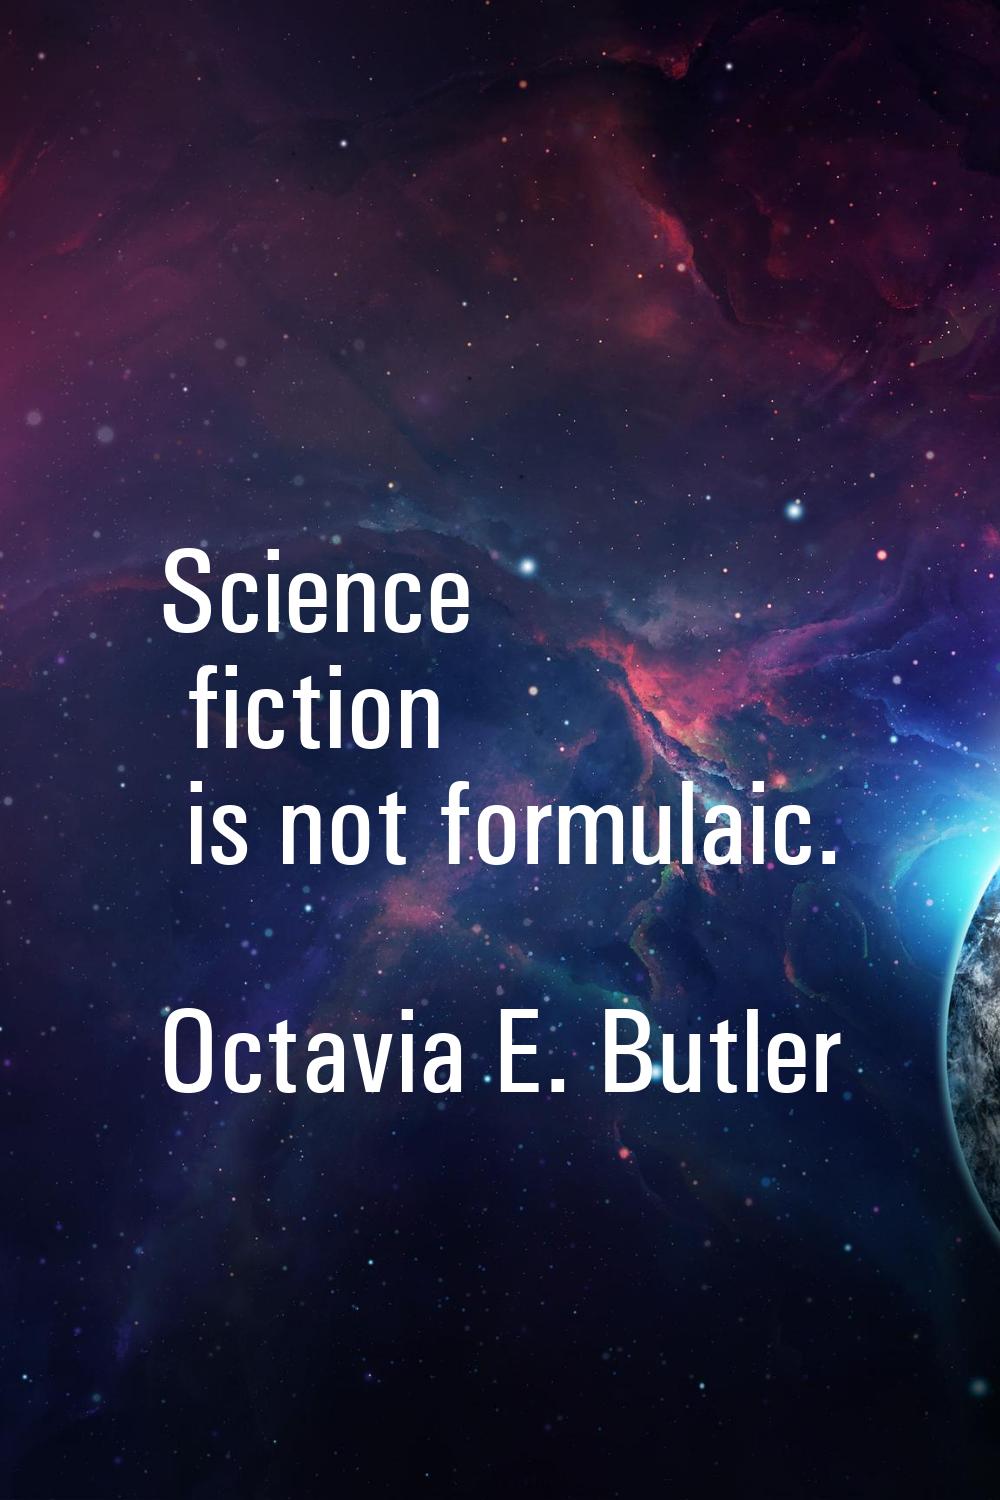 Science fiction is not formulaic.